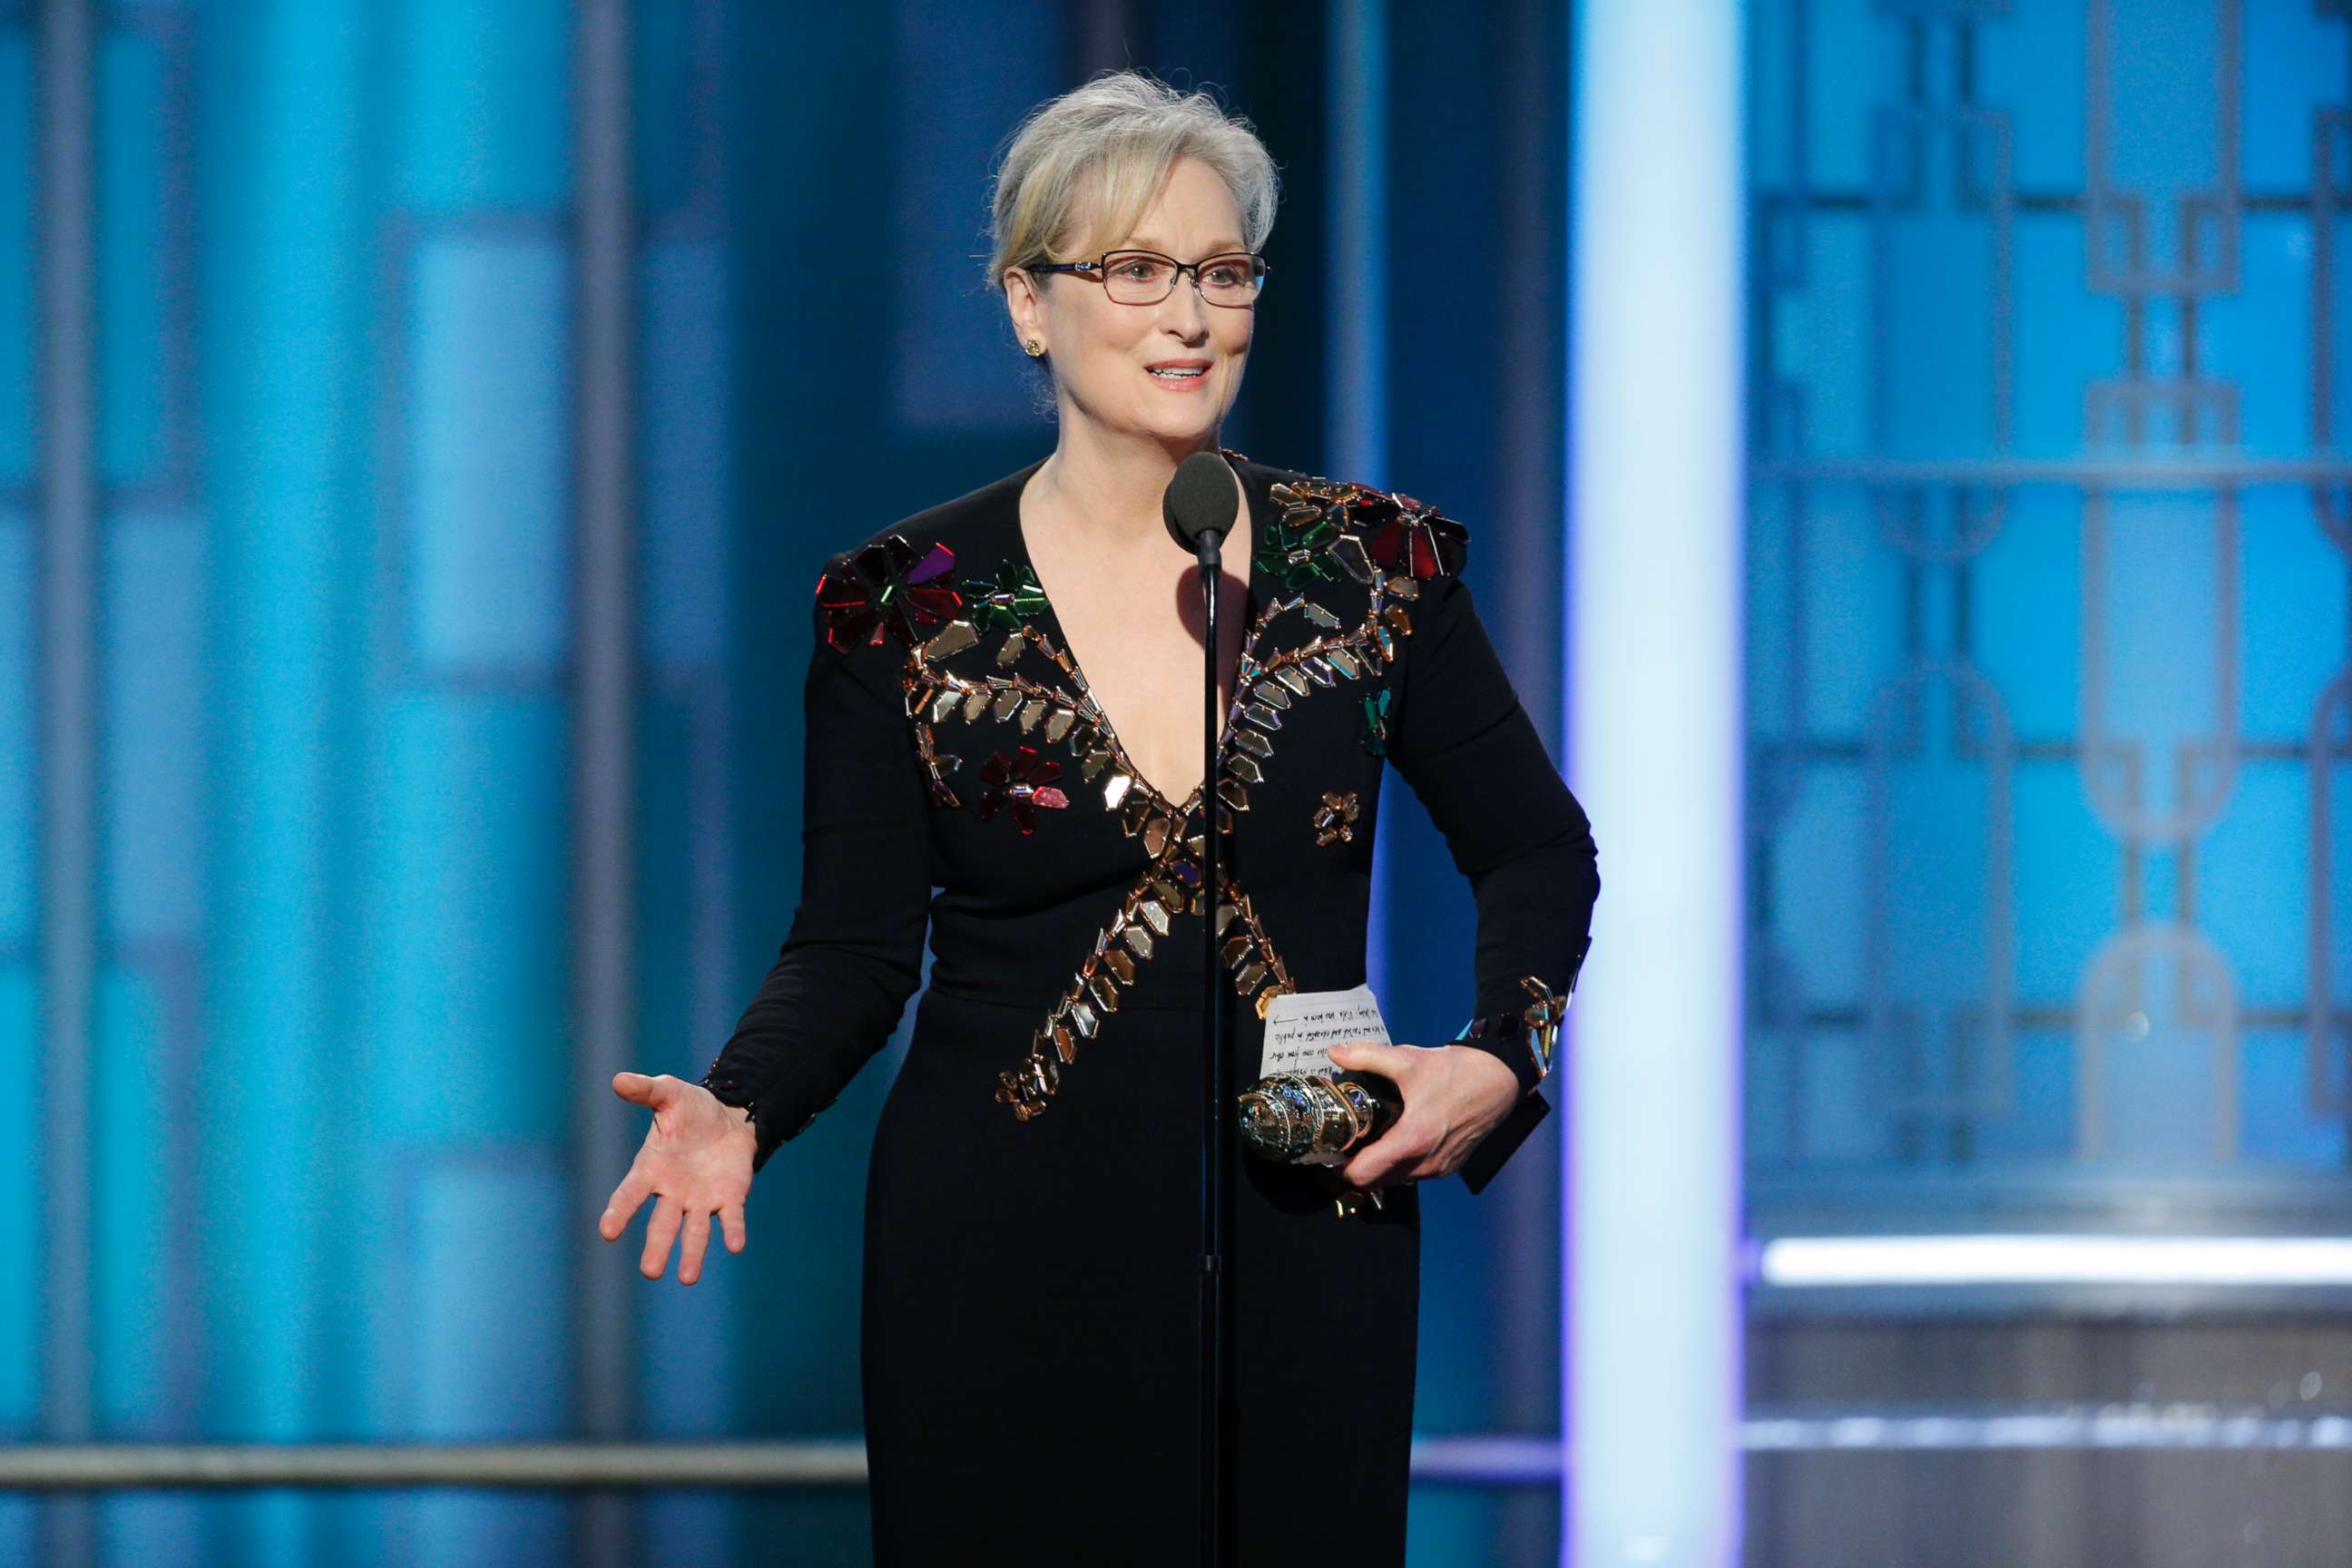 PHOTO: Meryl Streep accepts the Cecil B. DeMille Award at the 74th Annual Golden Globe Awards in Beverly Hills, Calif., Jan. 8, 2017. 